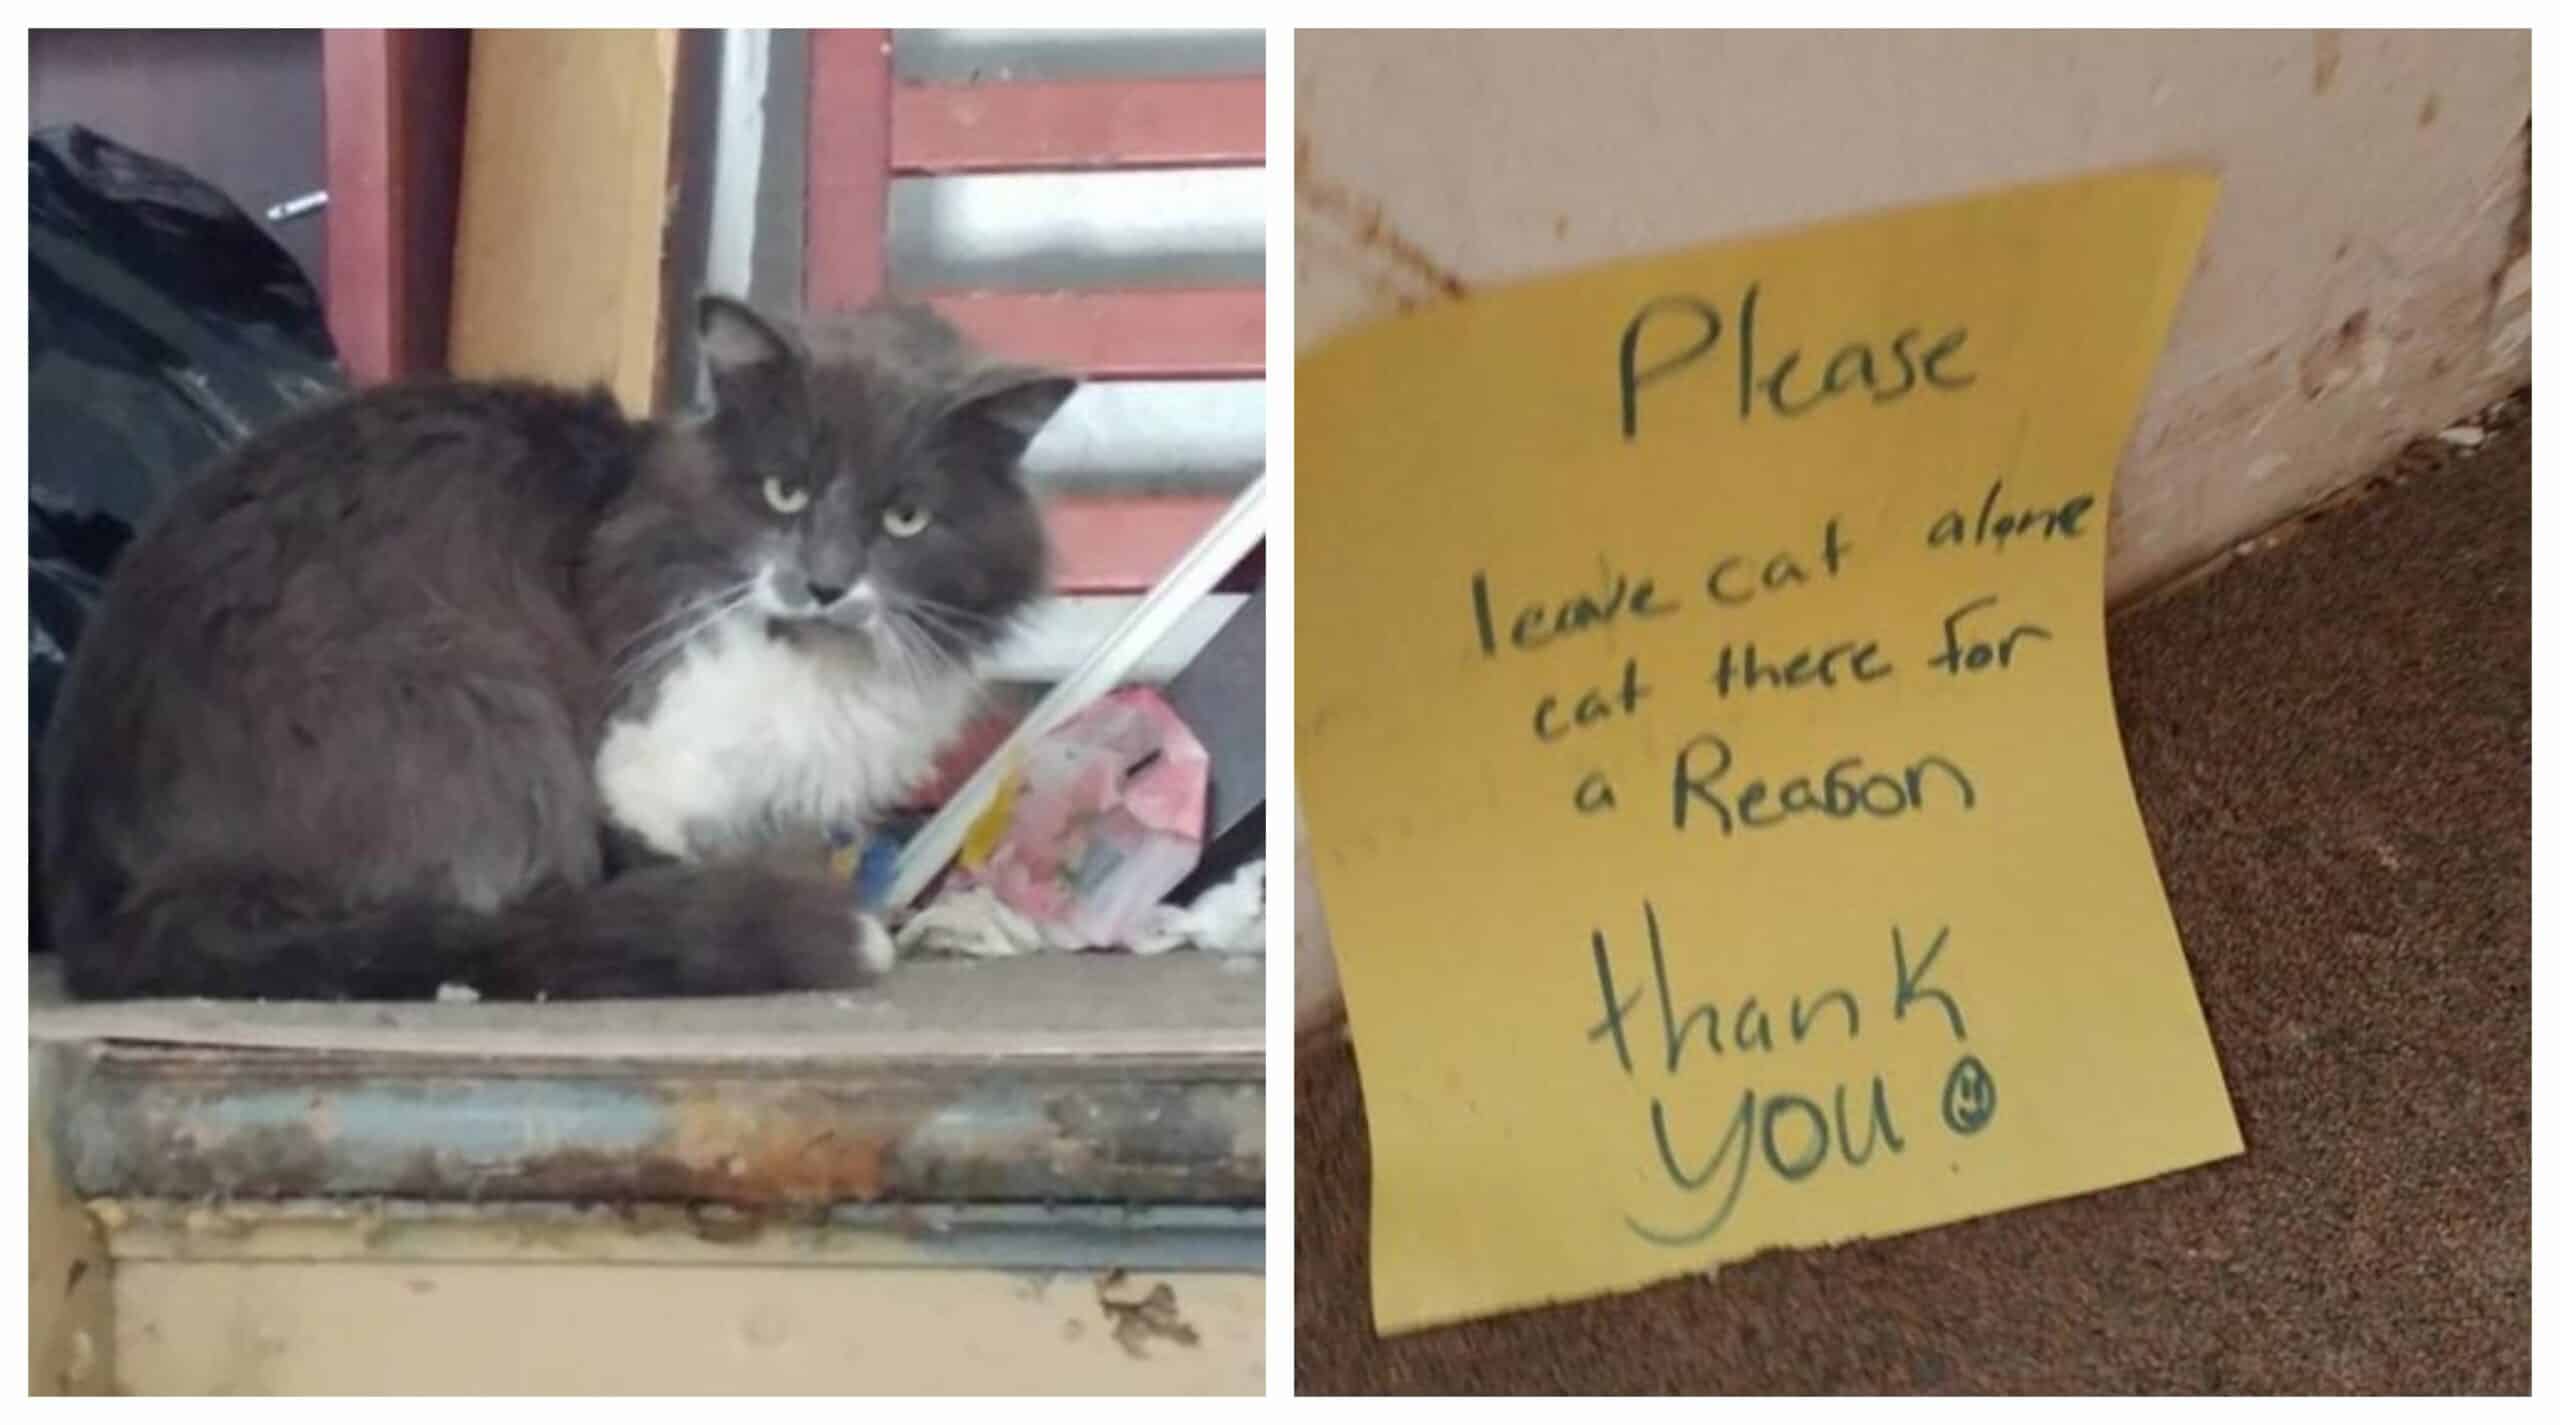 When a man discovered a lonely cat in the cold